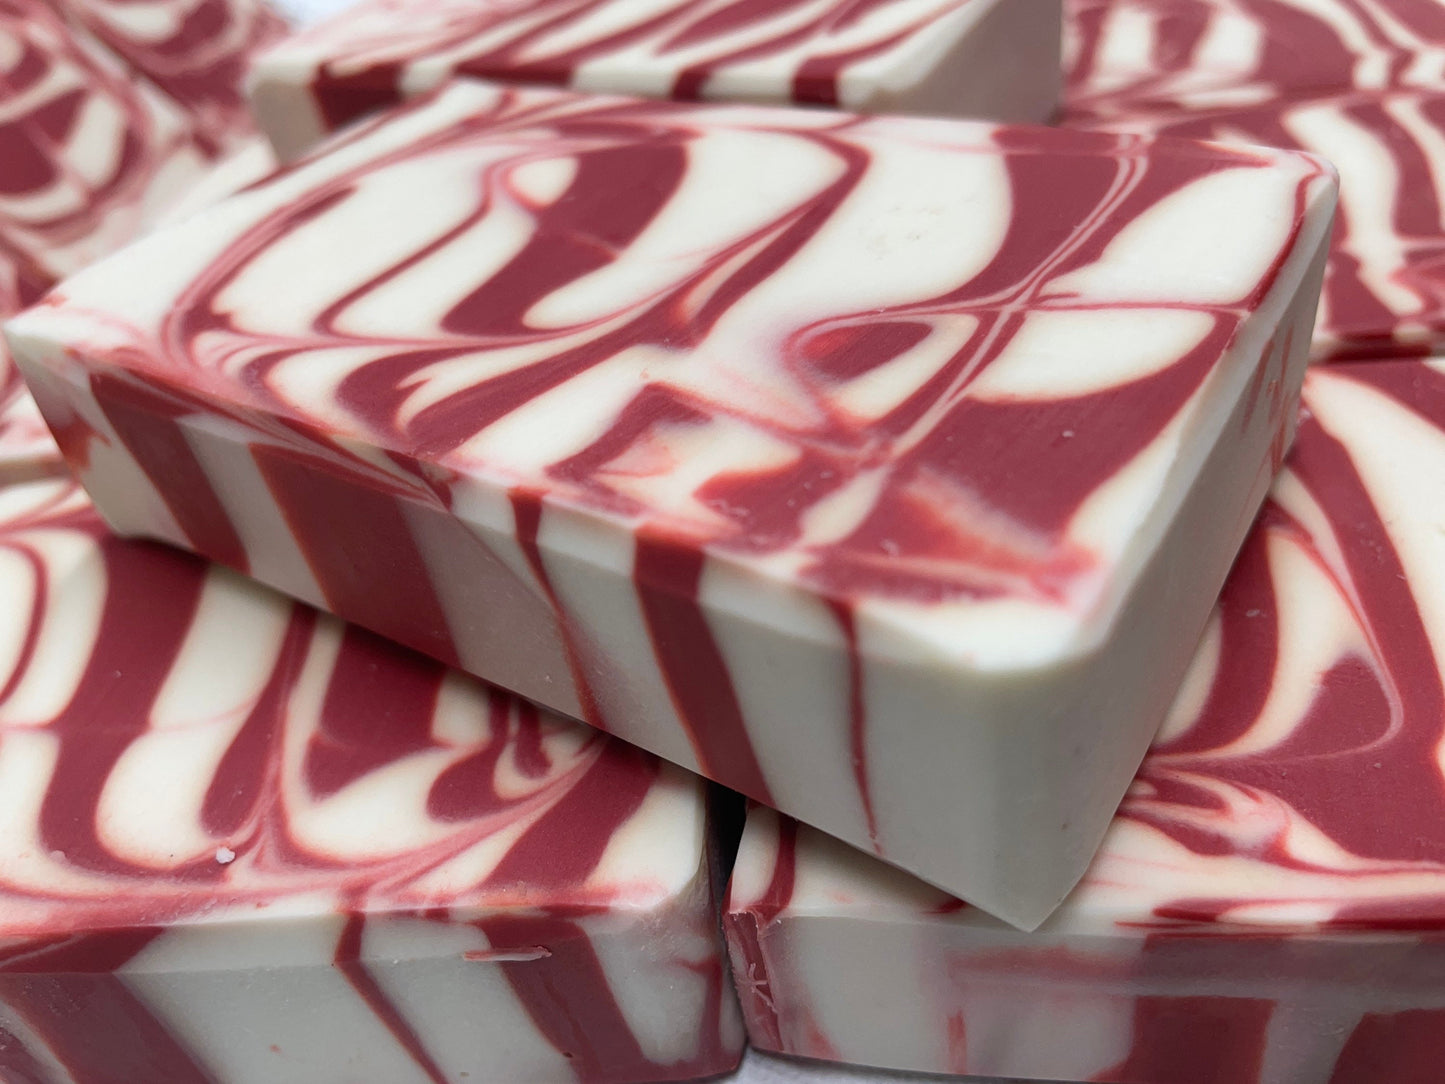 a photo of Candy Cane Soap with Peppermint Essential Oil that is striking red and white striped soap